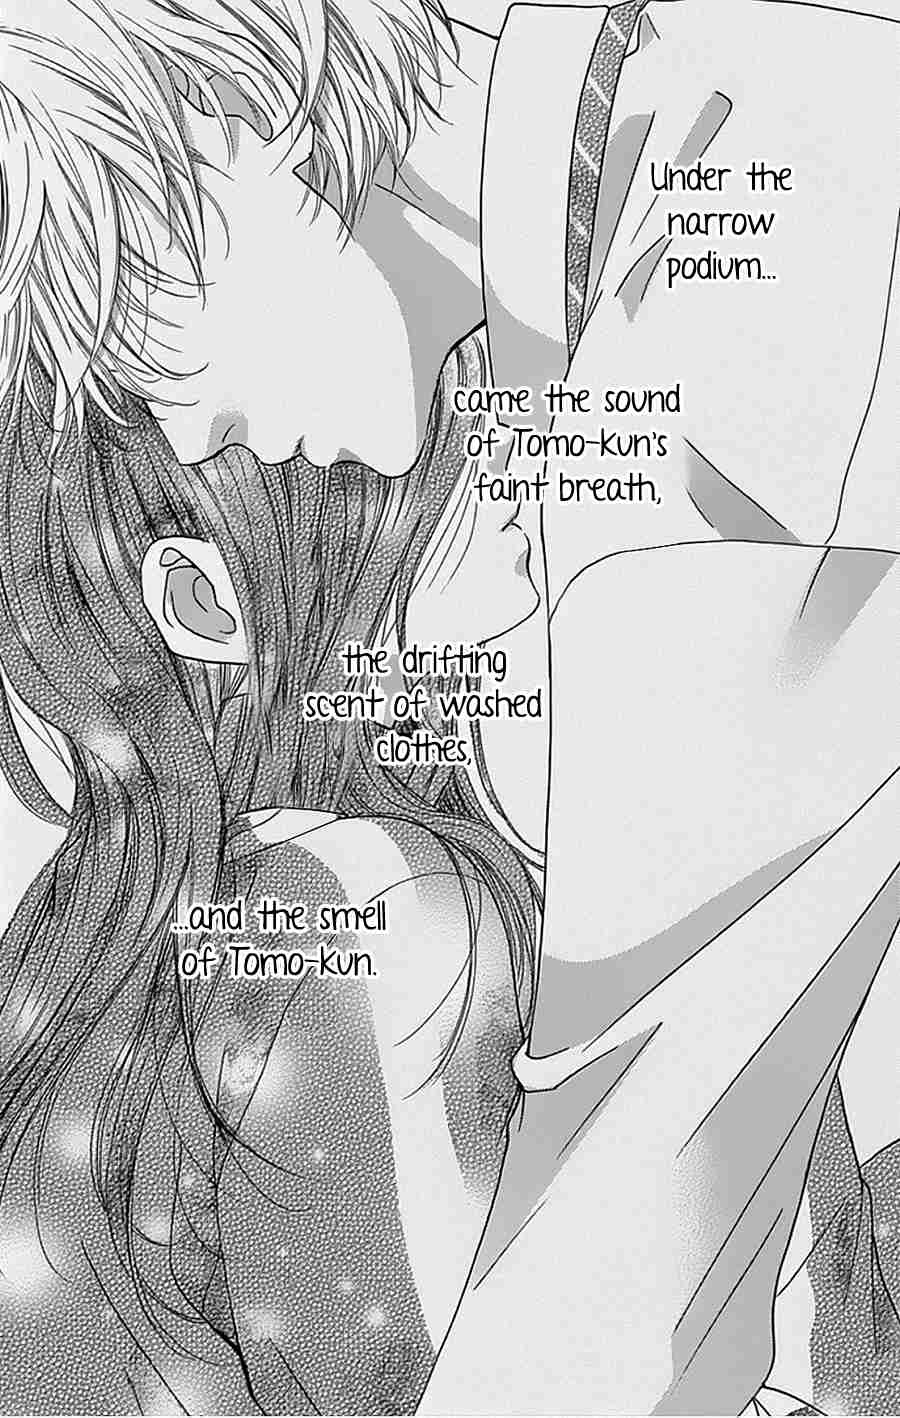 I Love You Baby Vol. 3 Ch. 21